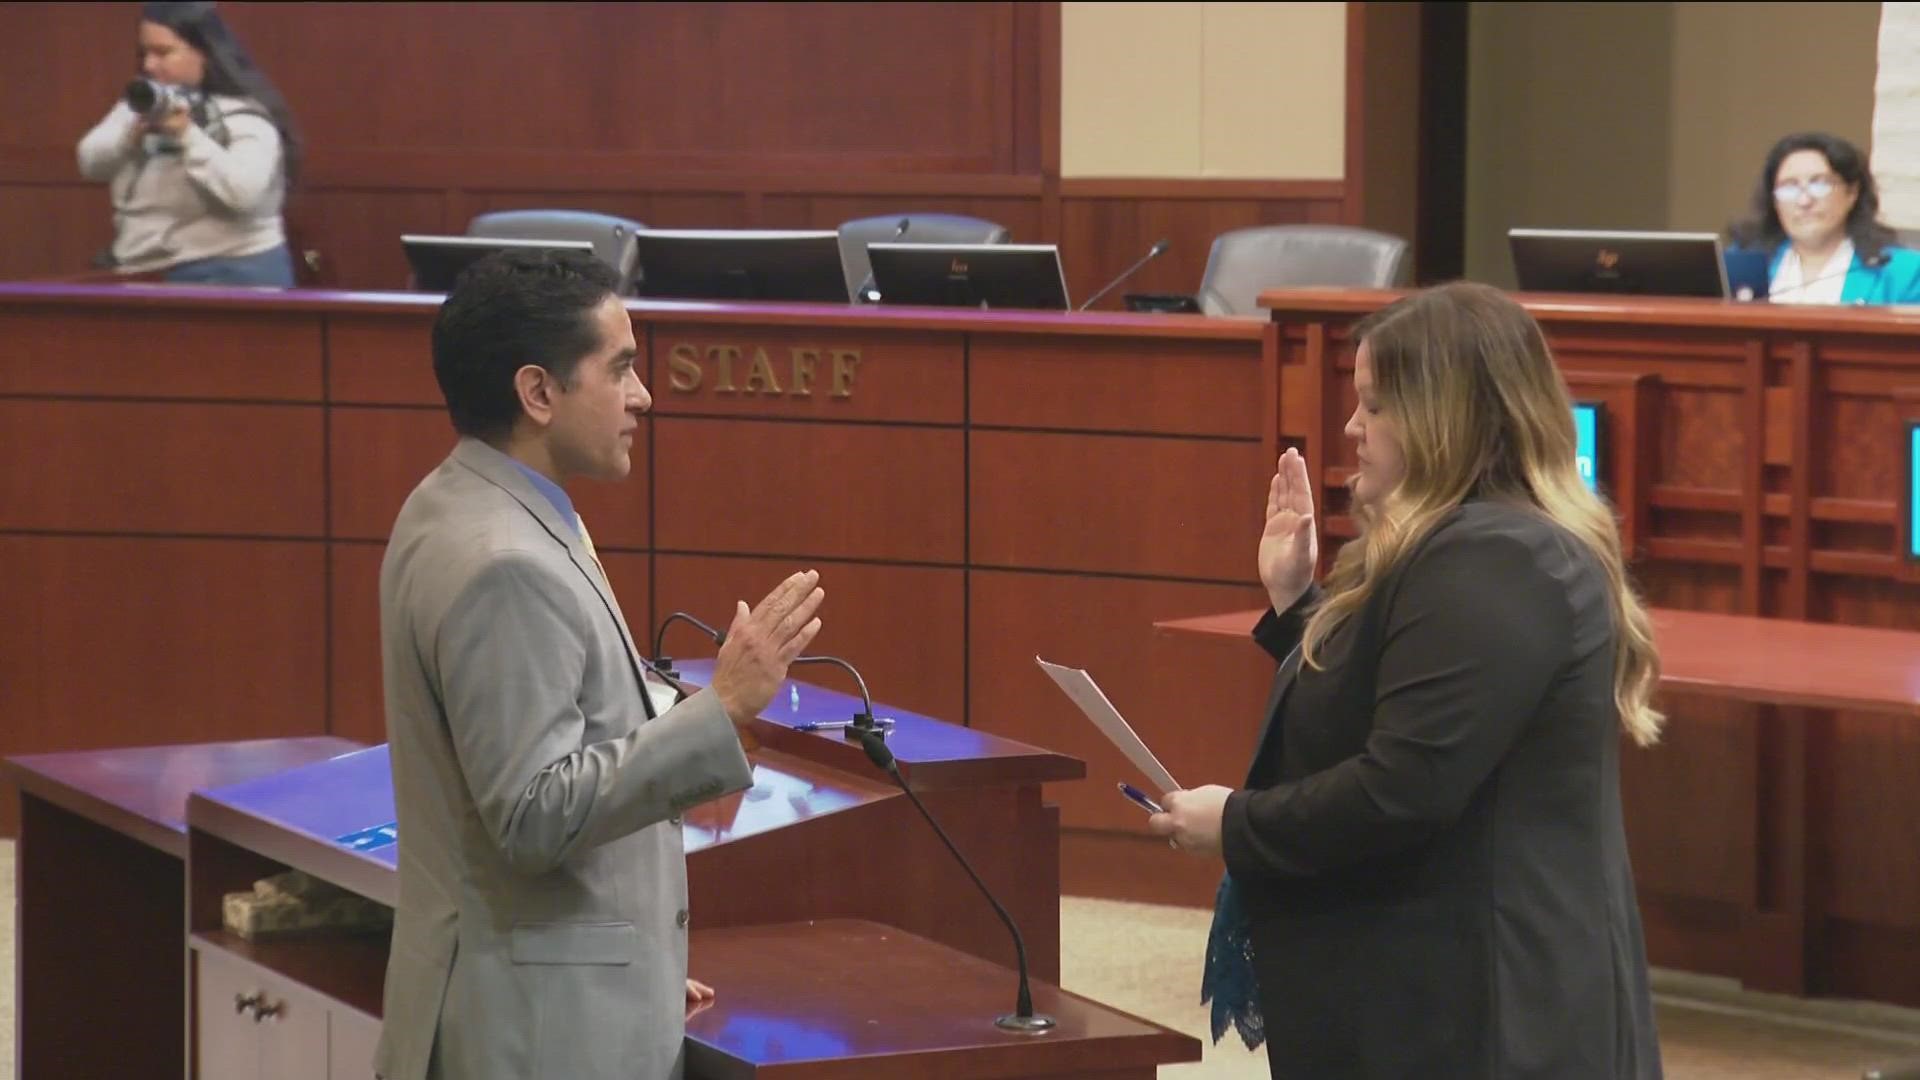 The Council has sworn in Alonso Gonzalez to the empty District 3 seat representing the city's southeast region, including Paseo Ranchero and Otay Ranch.